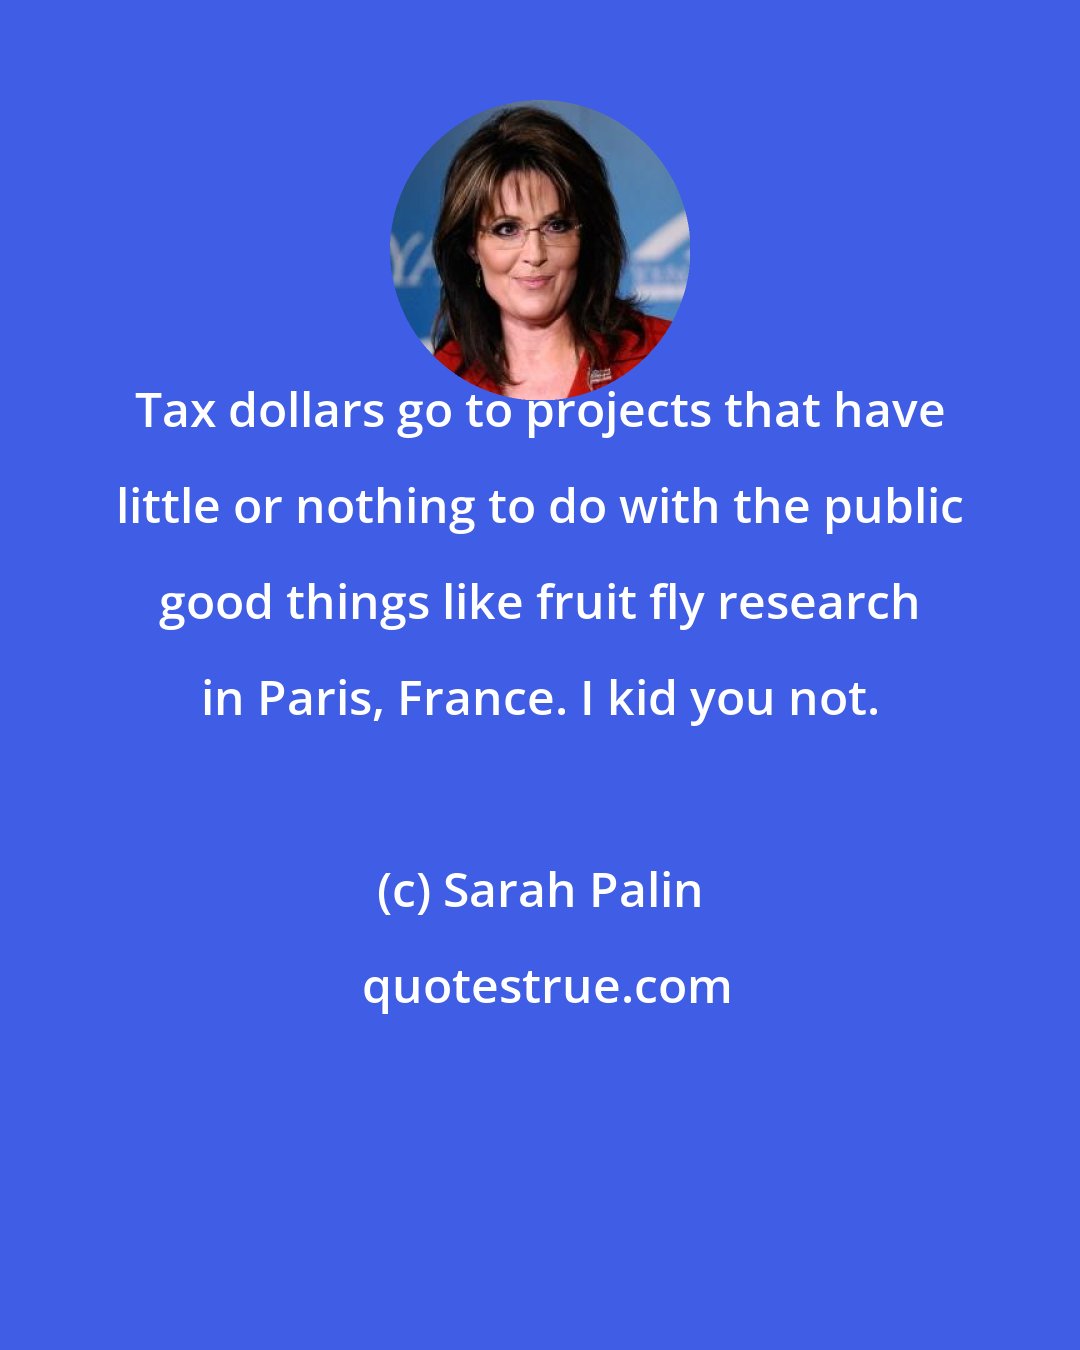 Sarah Palin: Tax dollars go to projects that have little or nothing to do with the public good things like fruit fly research in Paris, France. I kid you not.